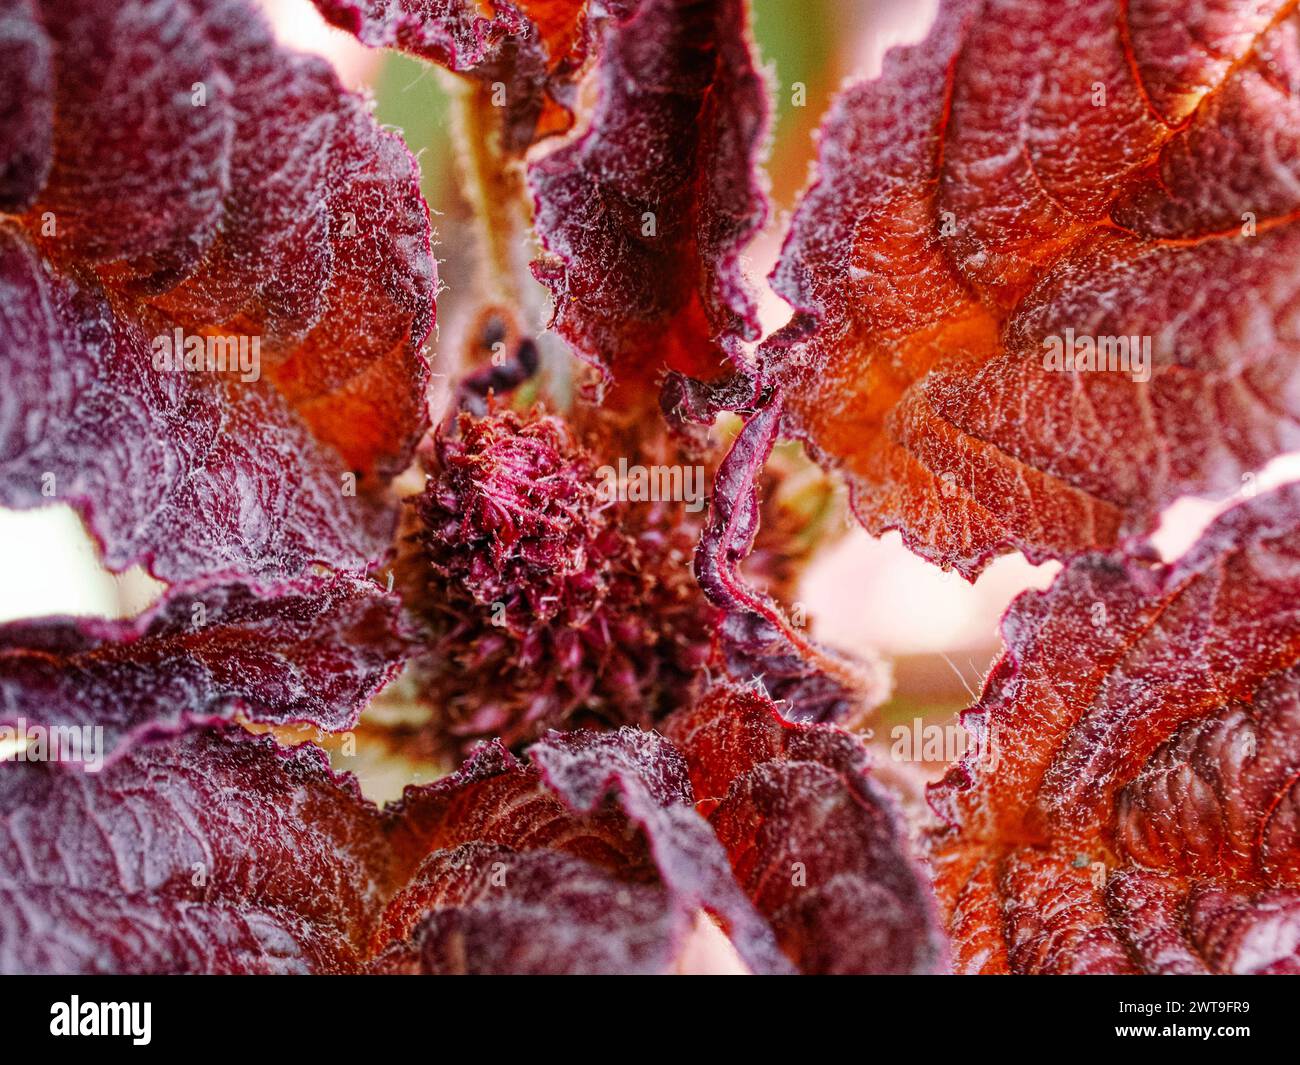 Vibrant red leaves with visible veins and rough texture. Stock Photo